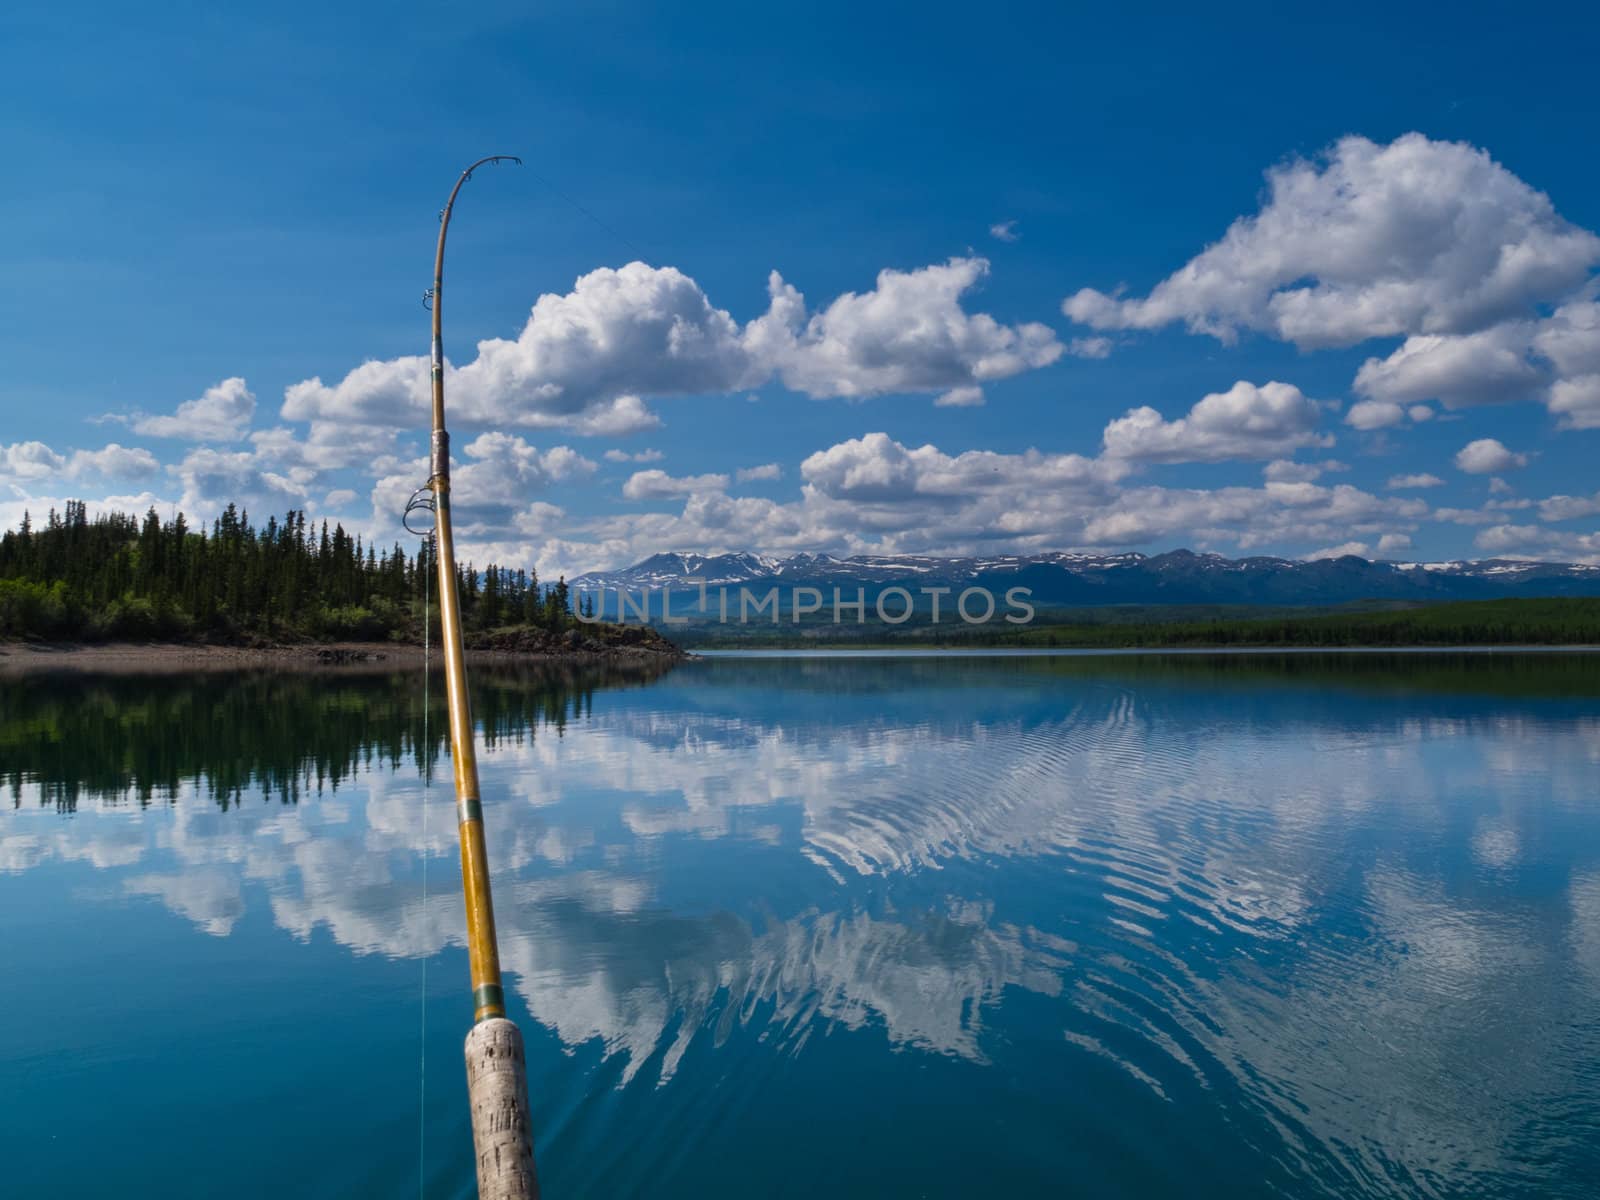 Fishing rod bends under weight of fish that just took lure in Lake Laberge, Yukon Territory, Canada